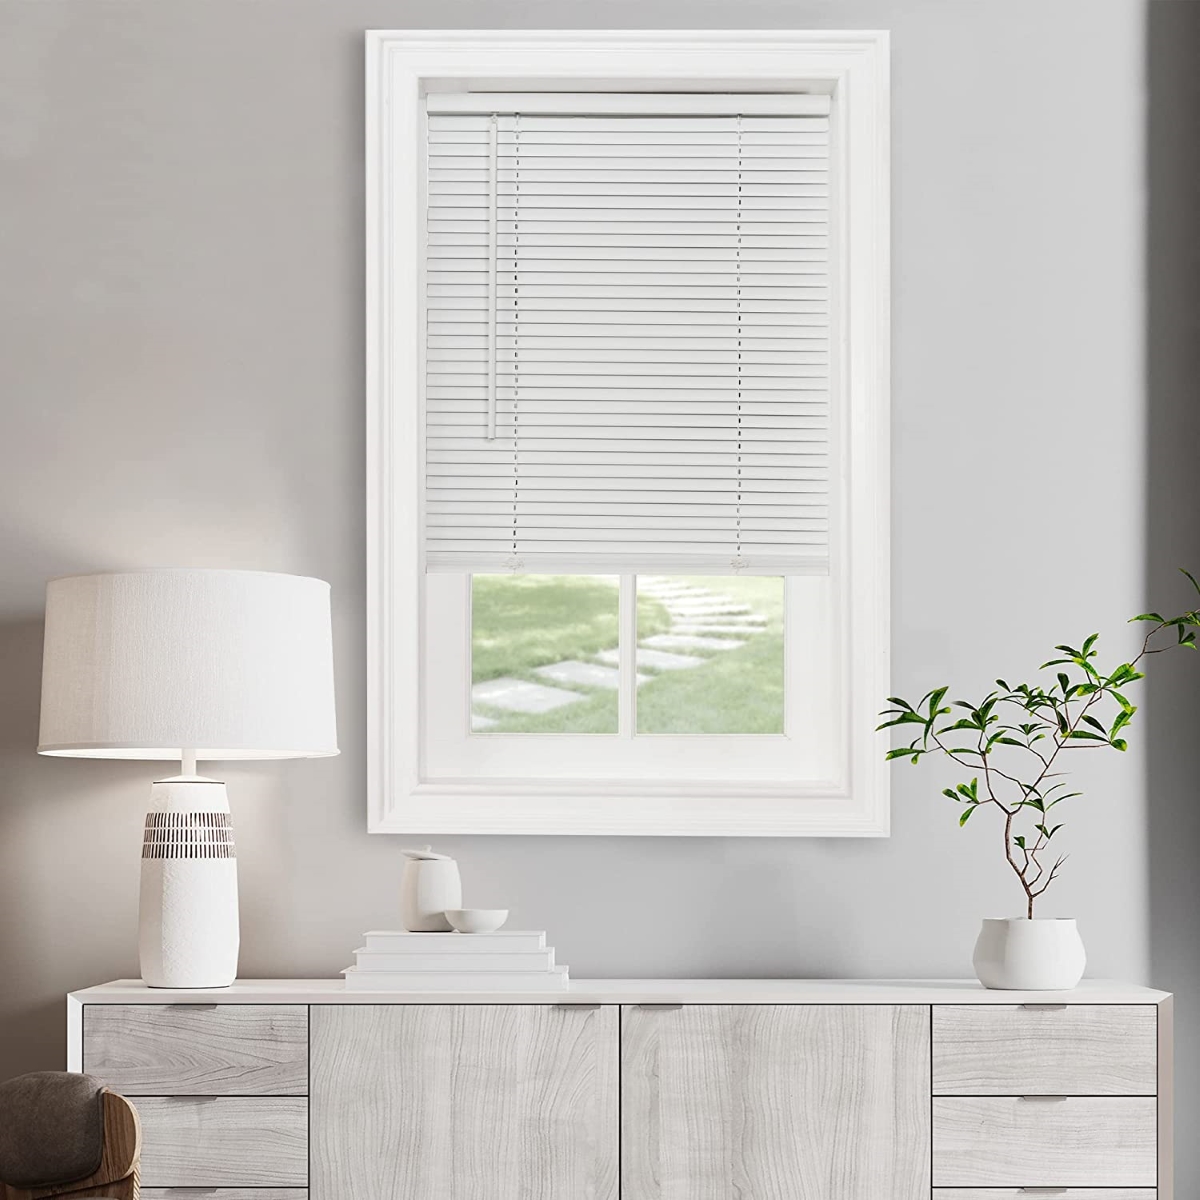 types of blinds - white blinds in window above cabinet